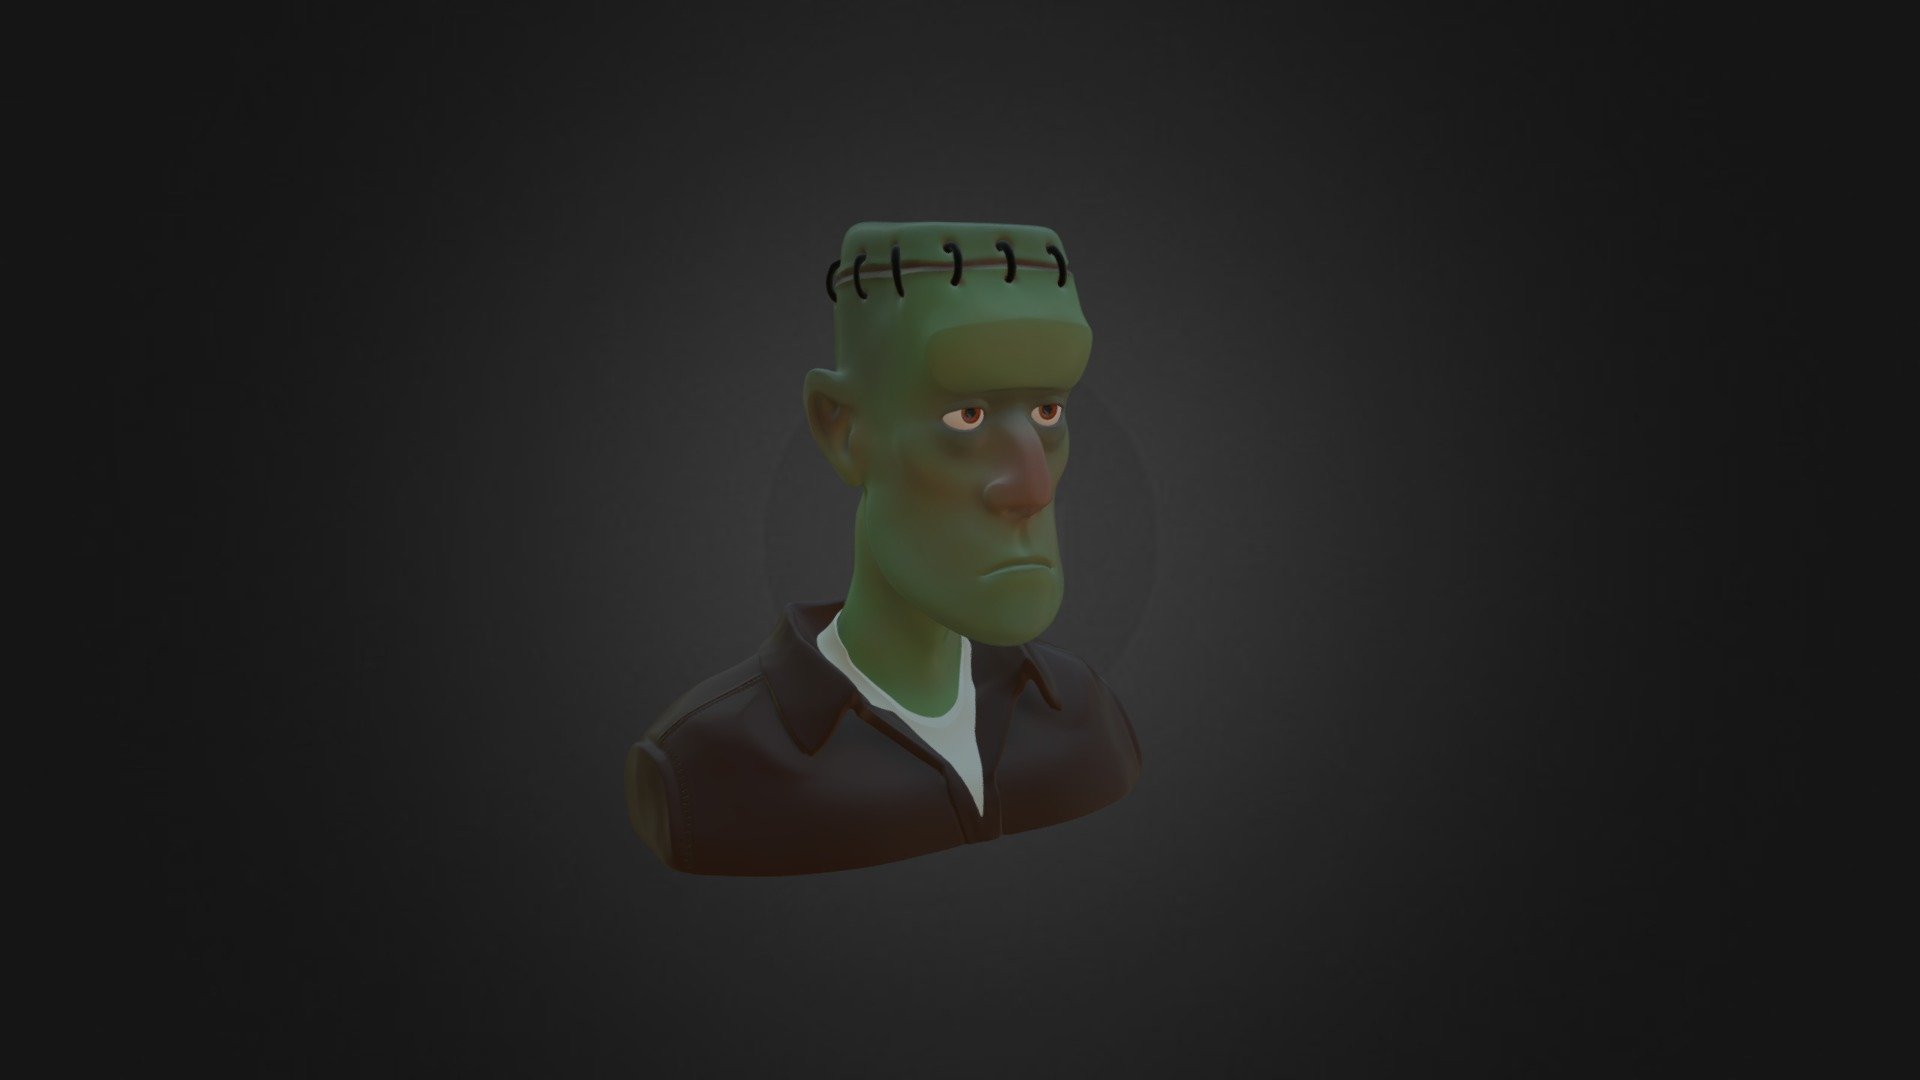 It's a study about toon characters. I used some references and did it. The frankenstein of my point of view 3d model